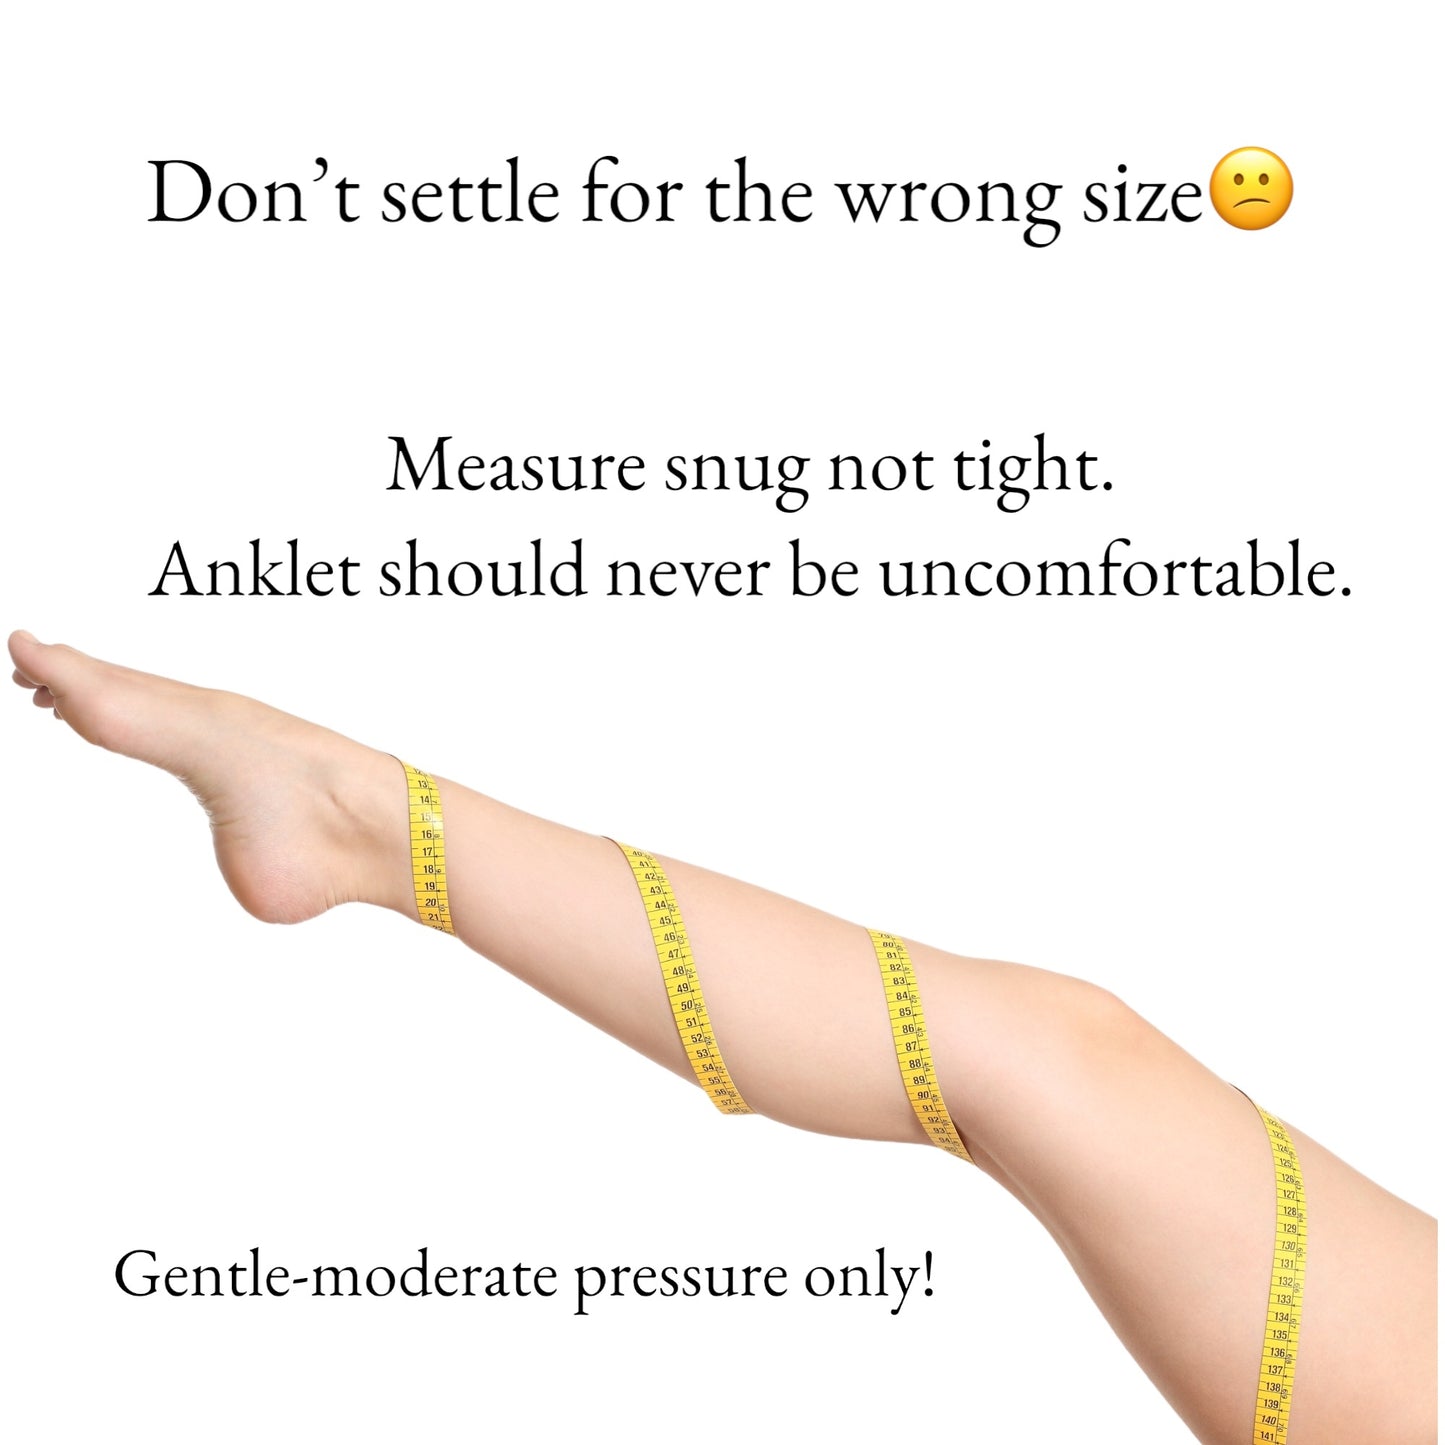 Anti Swelling Healing Anklet-Slip On Acupressure Band-Pain Relief-Balance-Anxiety-Menopausal Symptoms